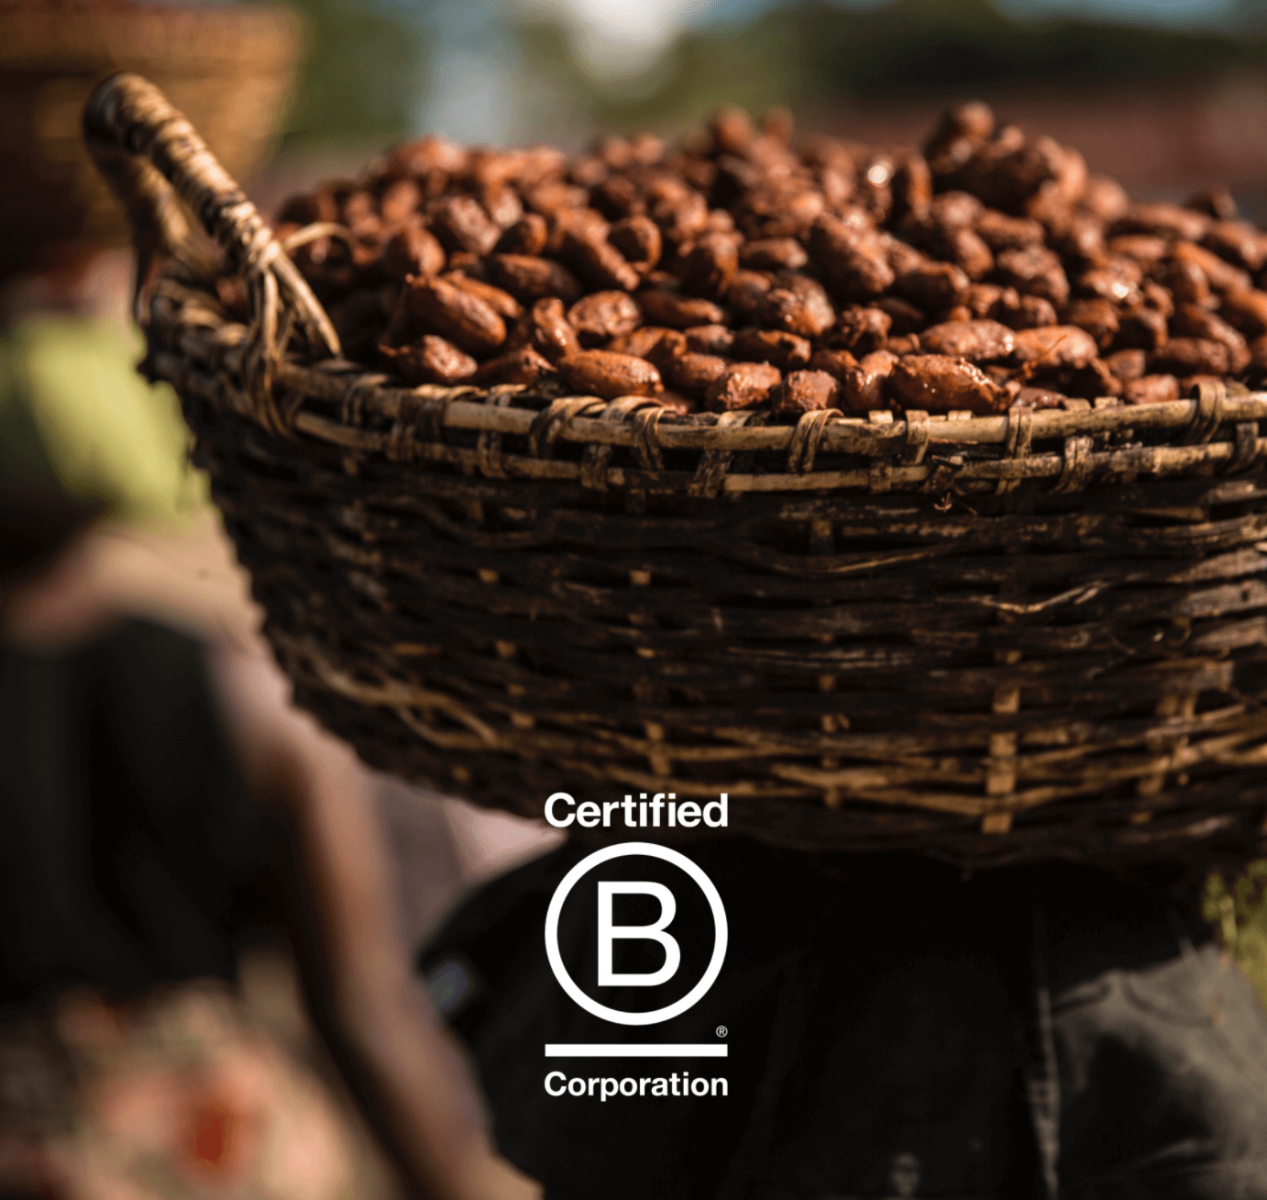 B Corp: The Future of the Cocoa Industry